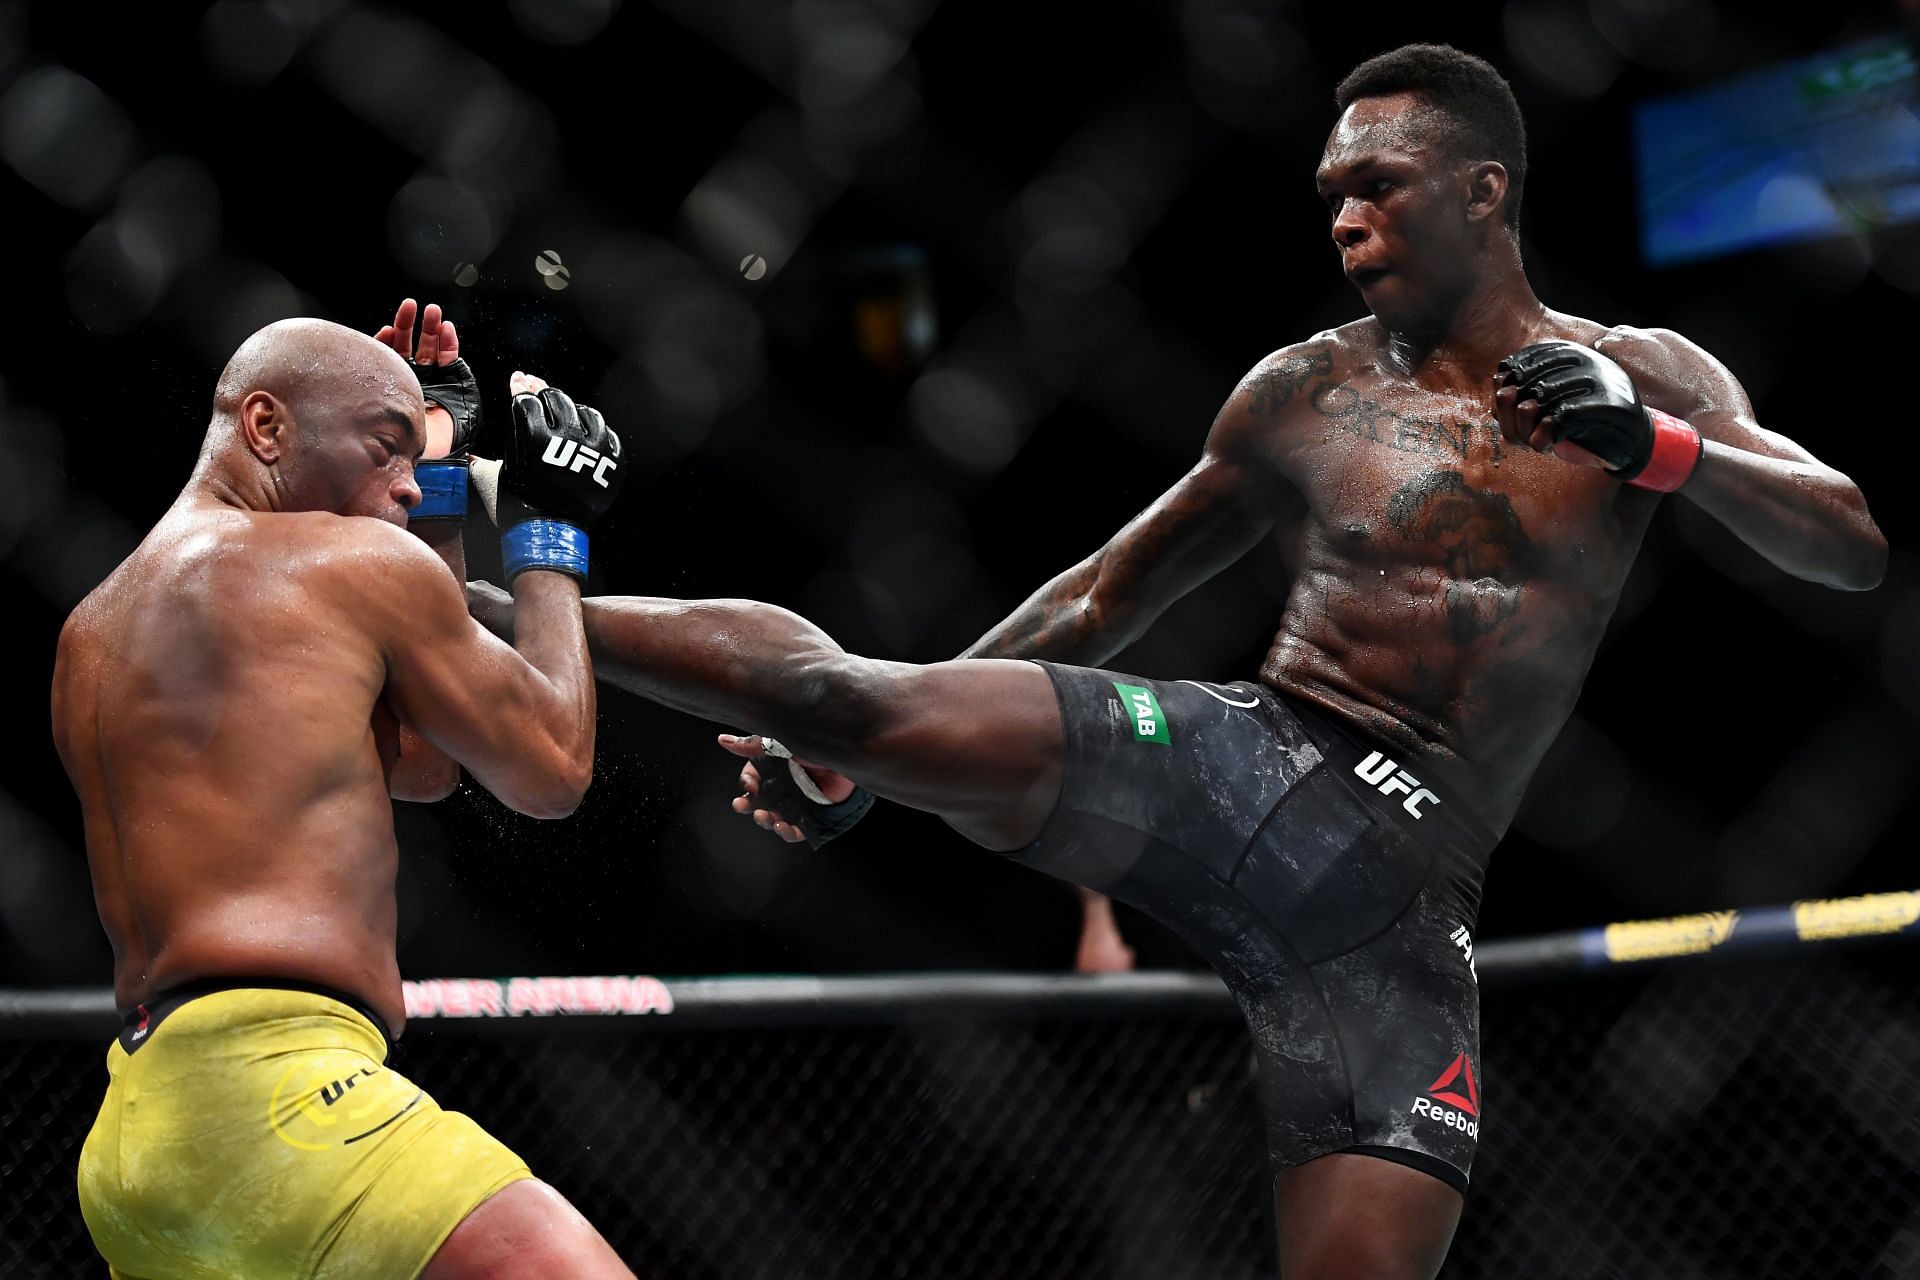 Can Israel Adesanya surpass the amazing legacy of former UFC middleweight champ Anderson Silva?